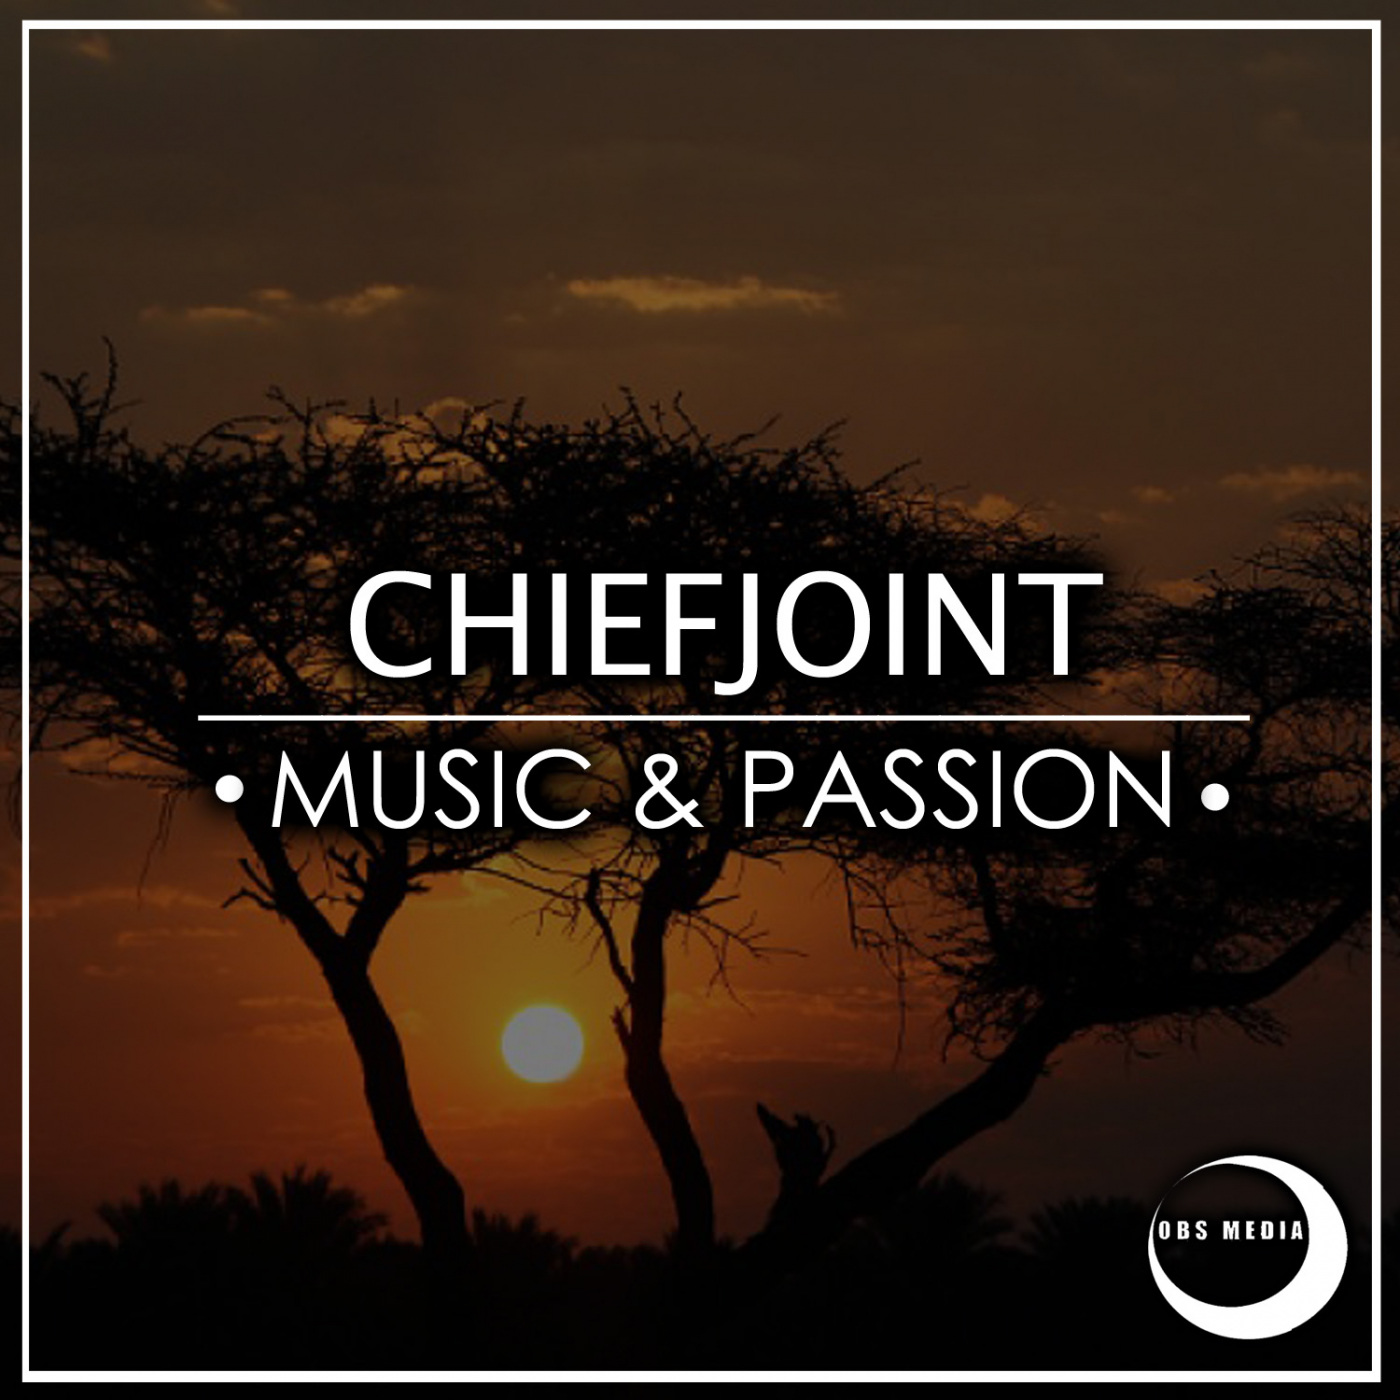 ChiefJoint - Music & Passion / OBS Media